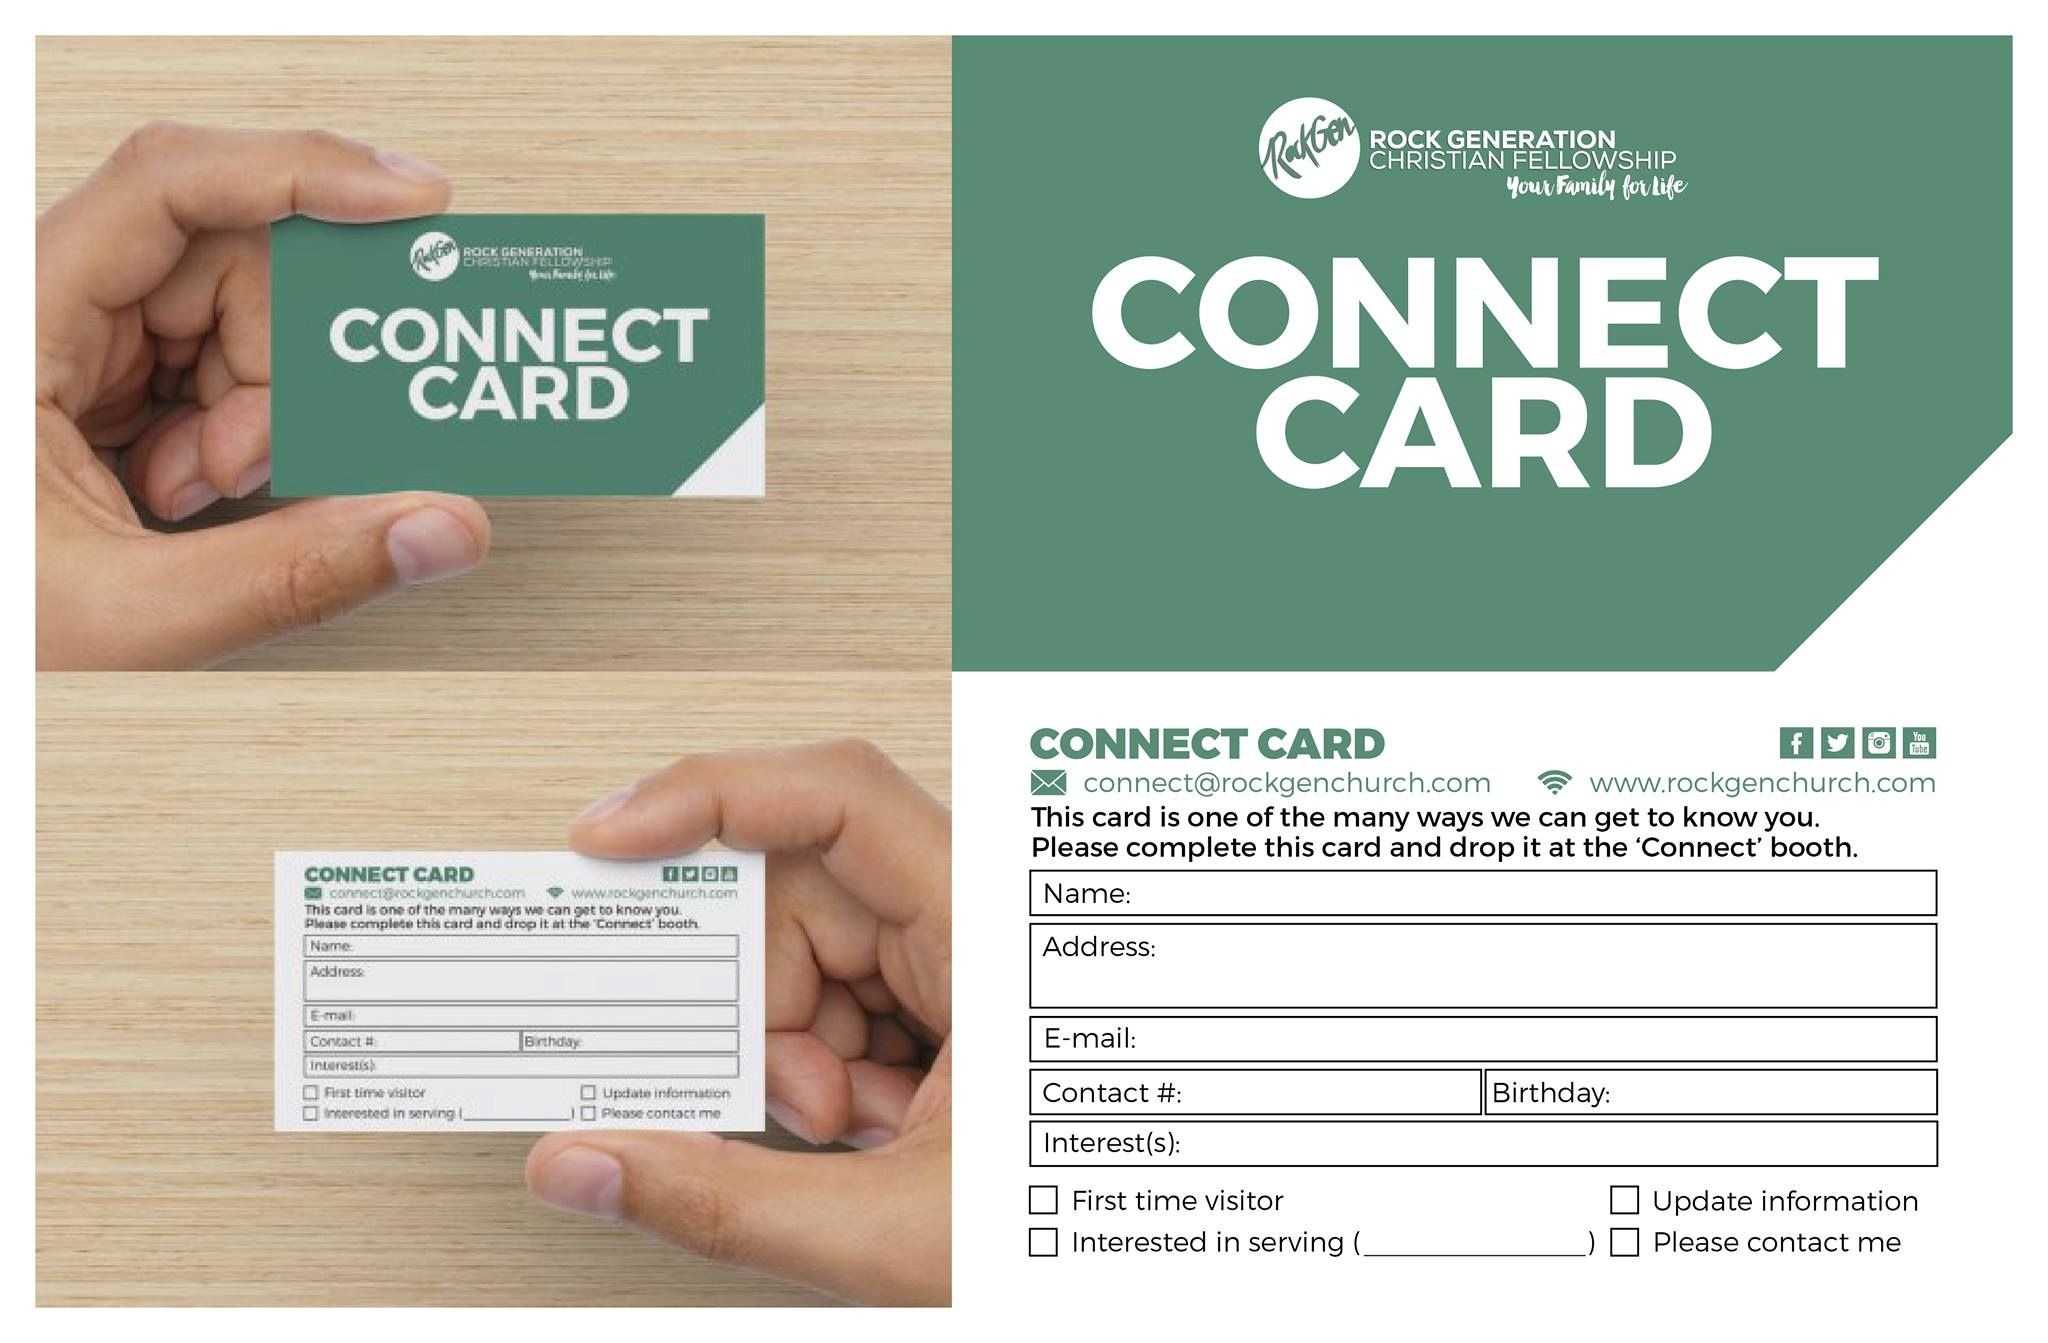 11-awesome-church-connection-card-examples-scbc-media-team-throughout